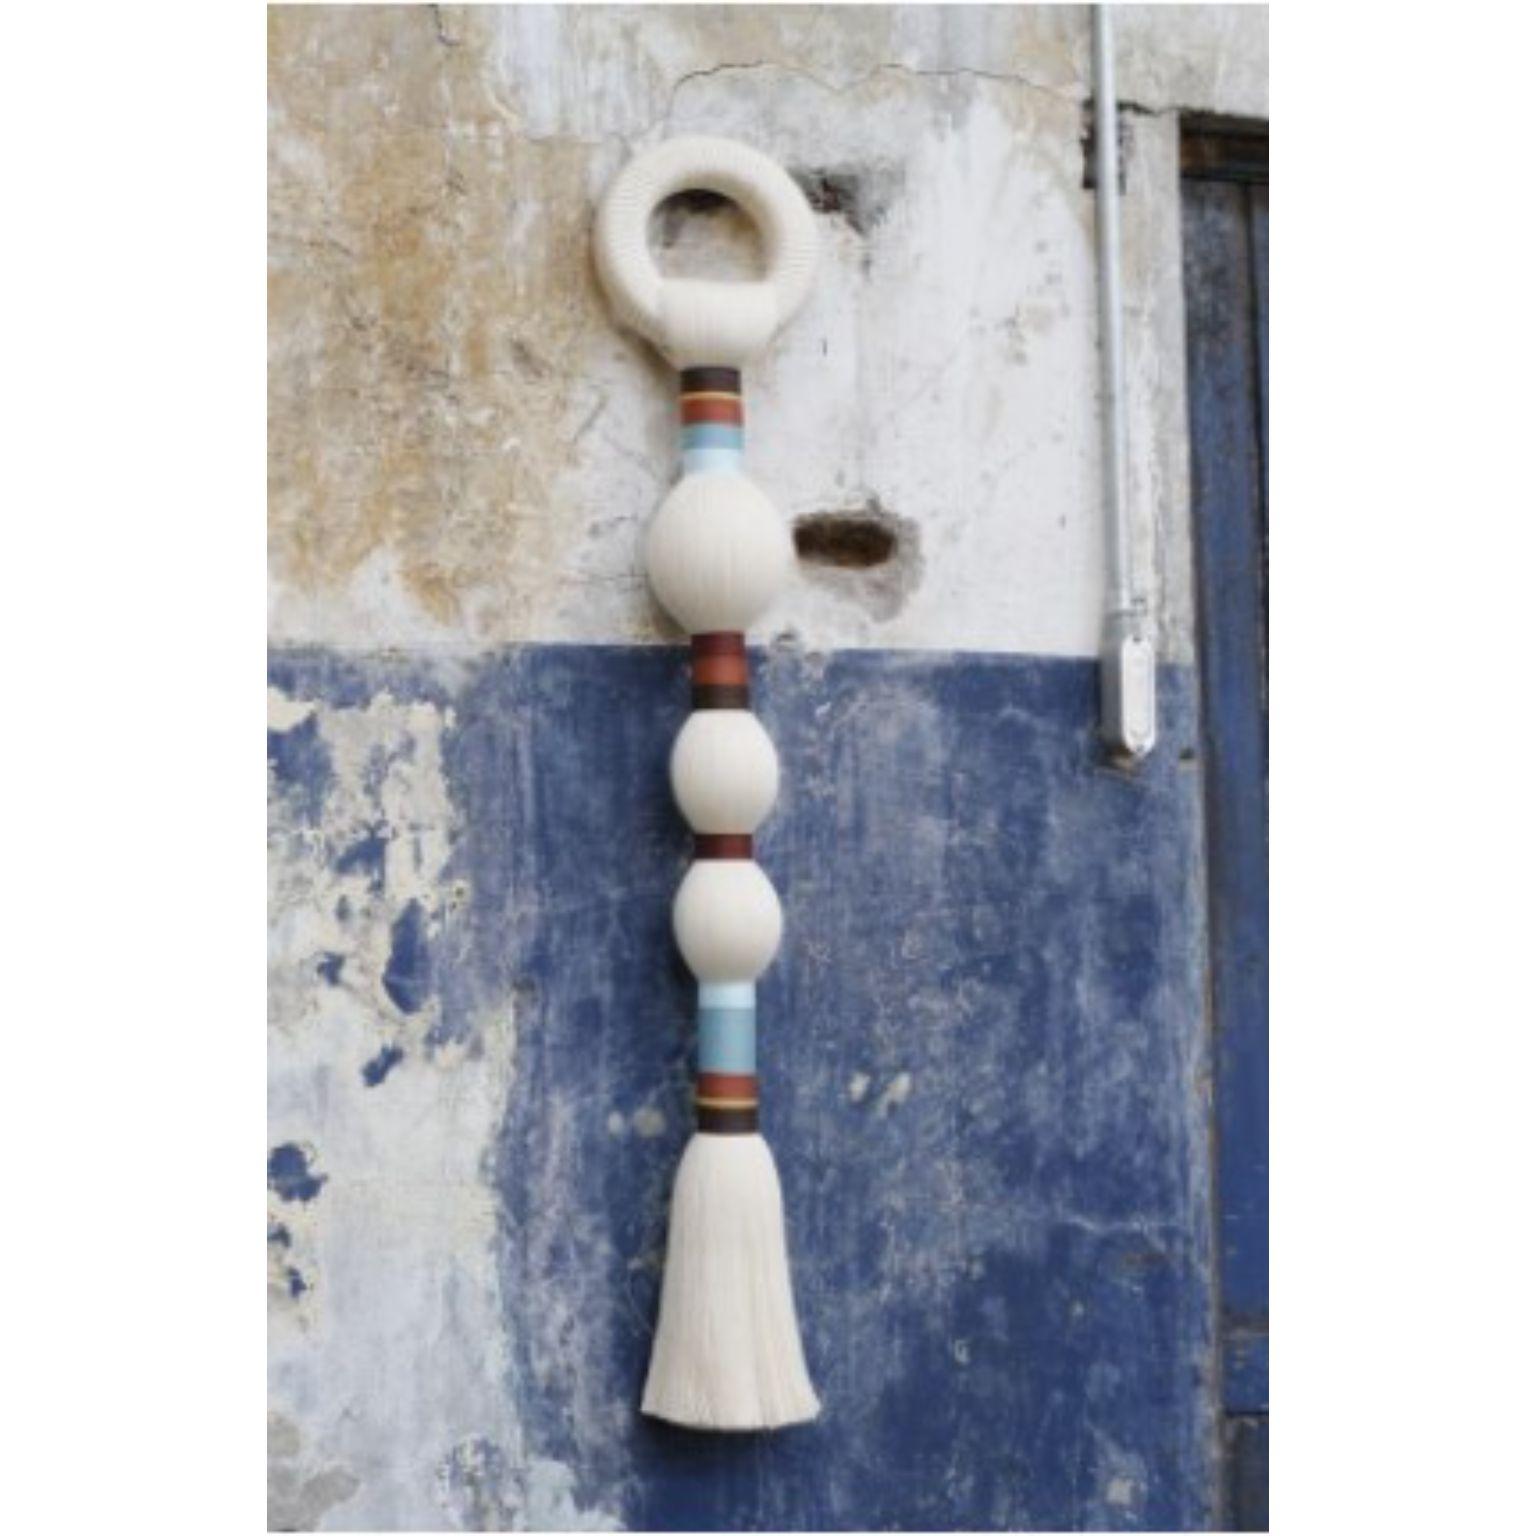 Zacatón Colorín Large Wall Decoration by Caralarga
Dimensions: D18 x W5 x H105 cm
Materials: 100% RAW COTTON THREAD, NATURAL SANSEVIERIA FIBER, TINTED COTTON THREAD, LINED MDF RING, PAPER MACHÉ SPHERES.
HANDMADE

Caralarga is a textile design